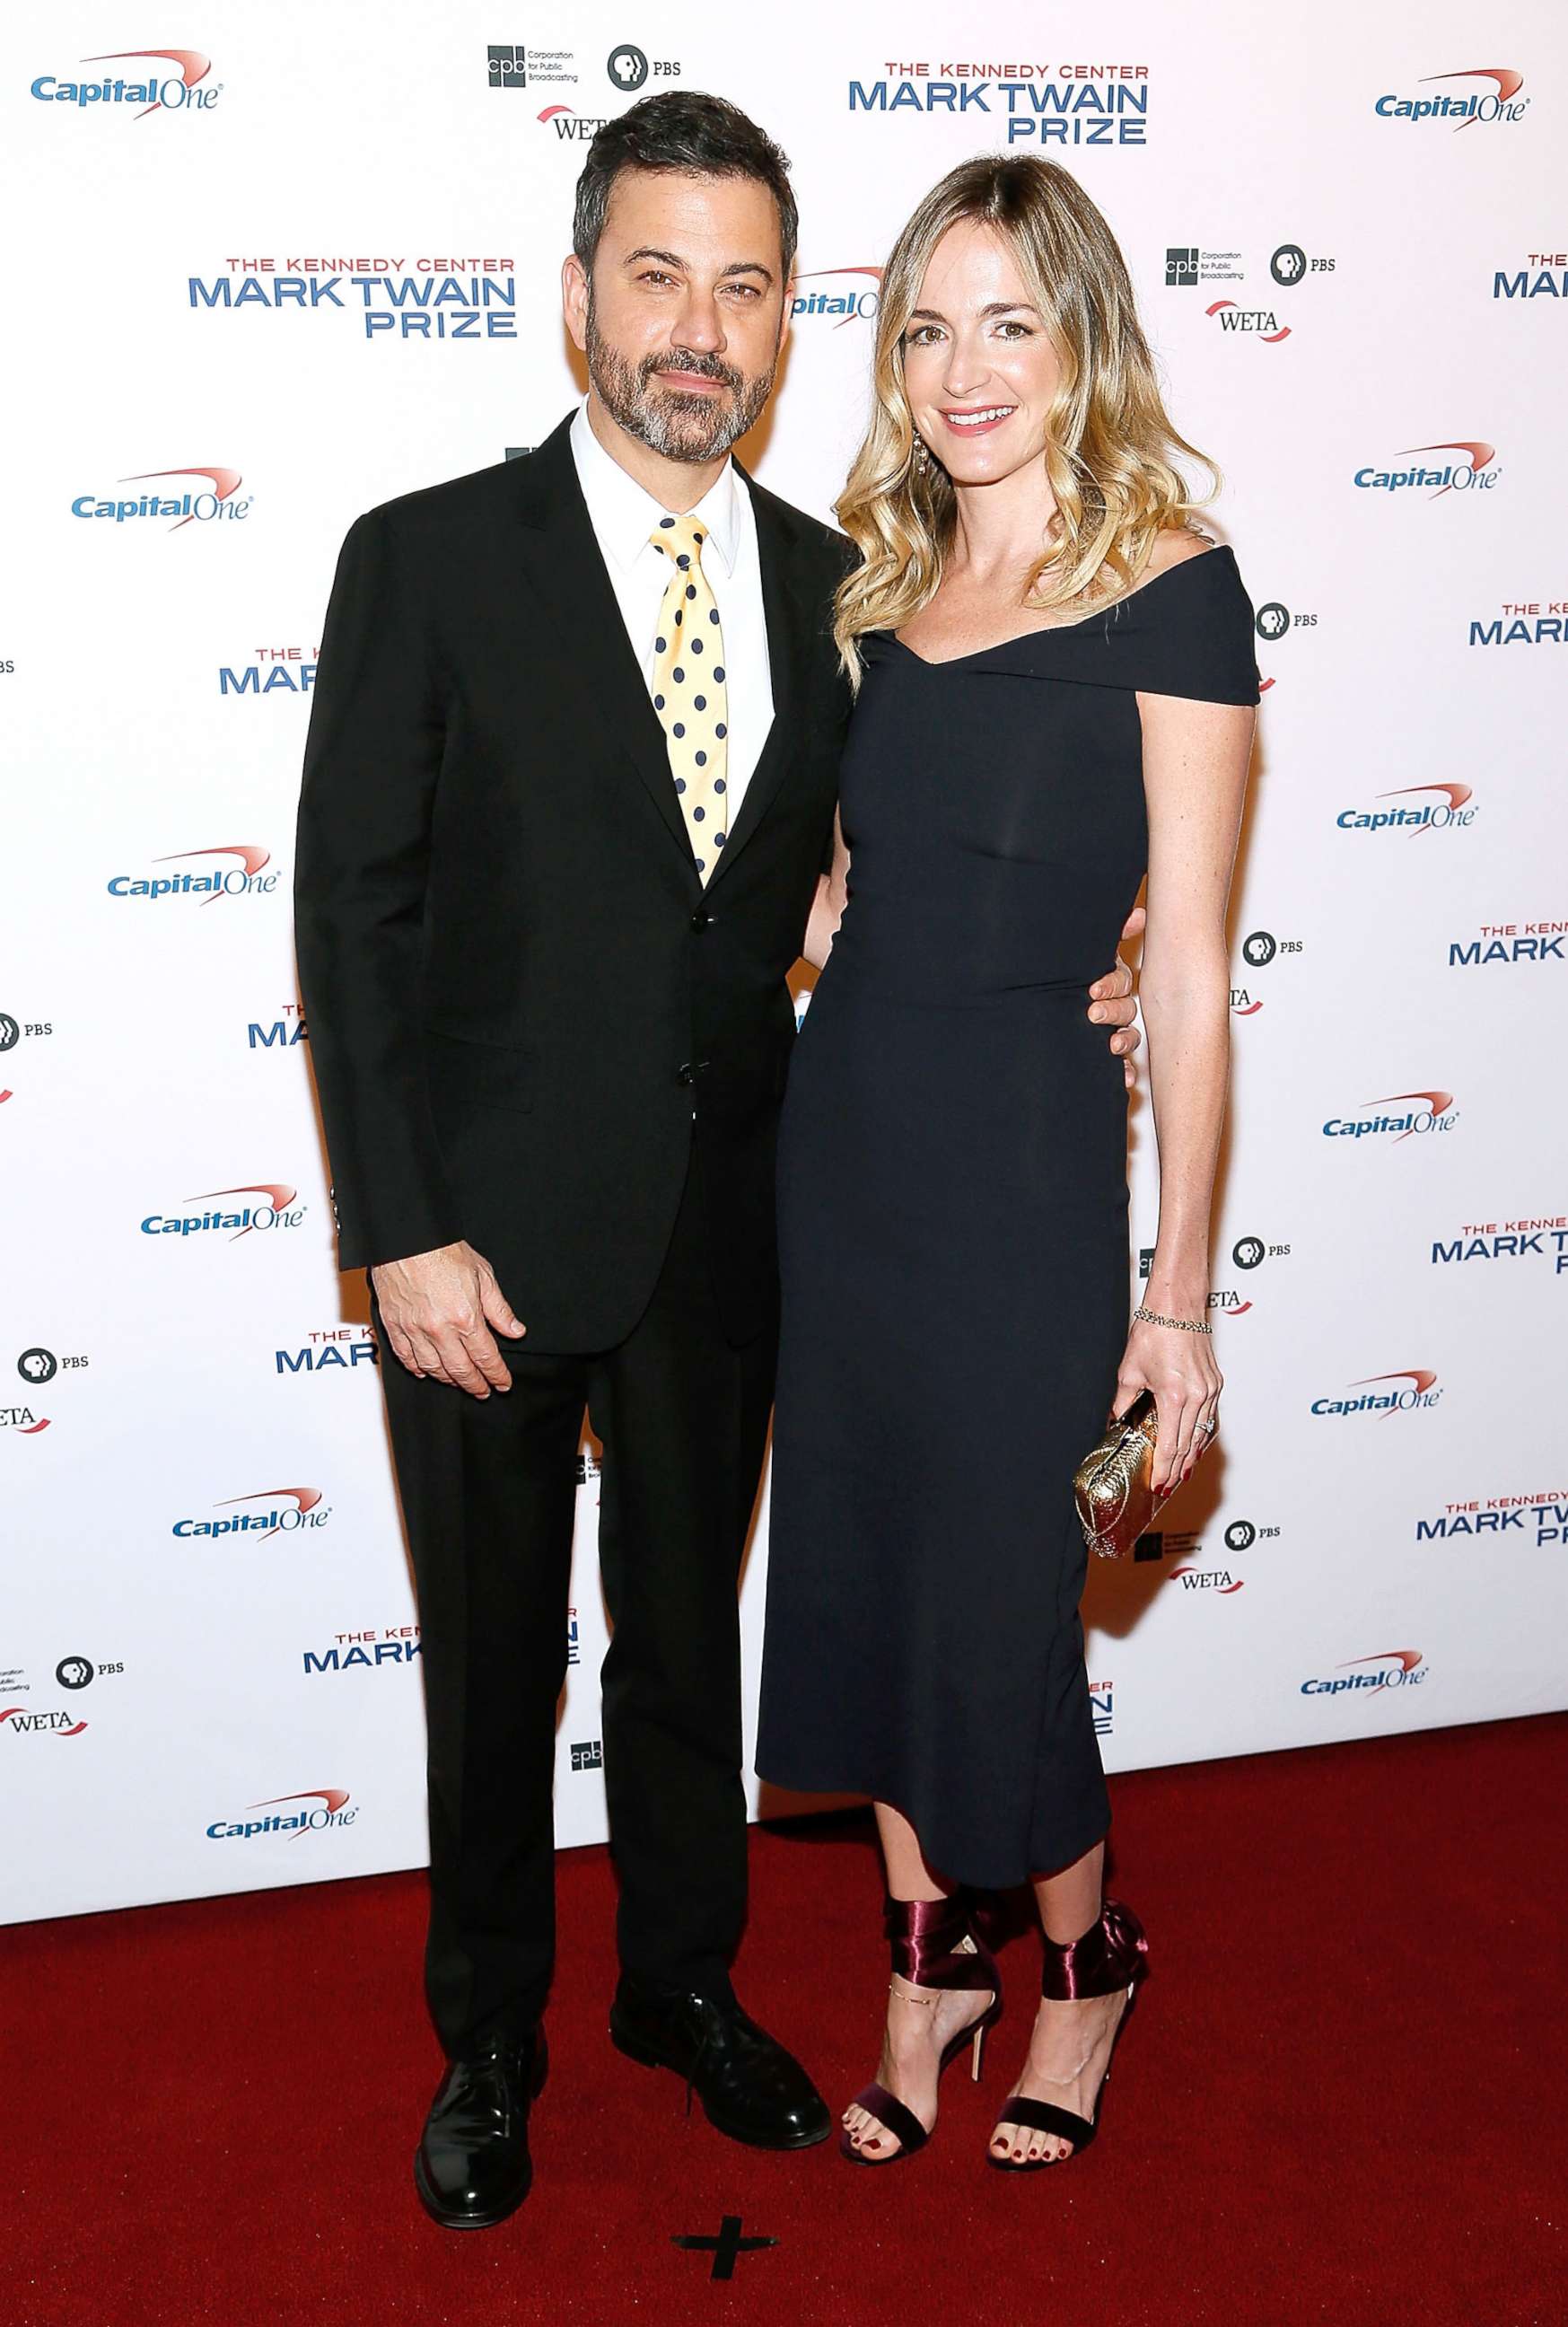 PHOTO: Jimmy Kimmel and his wife Molly McNearney arrive to the 2017 Mark Twain Prize for American Humor at The Kennedy Center, Oct. 22, 2017, in Washington, D.C.